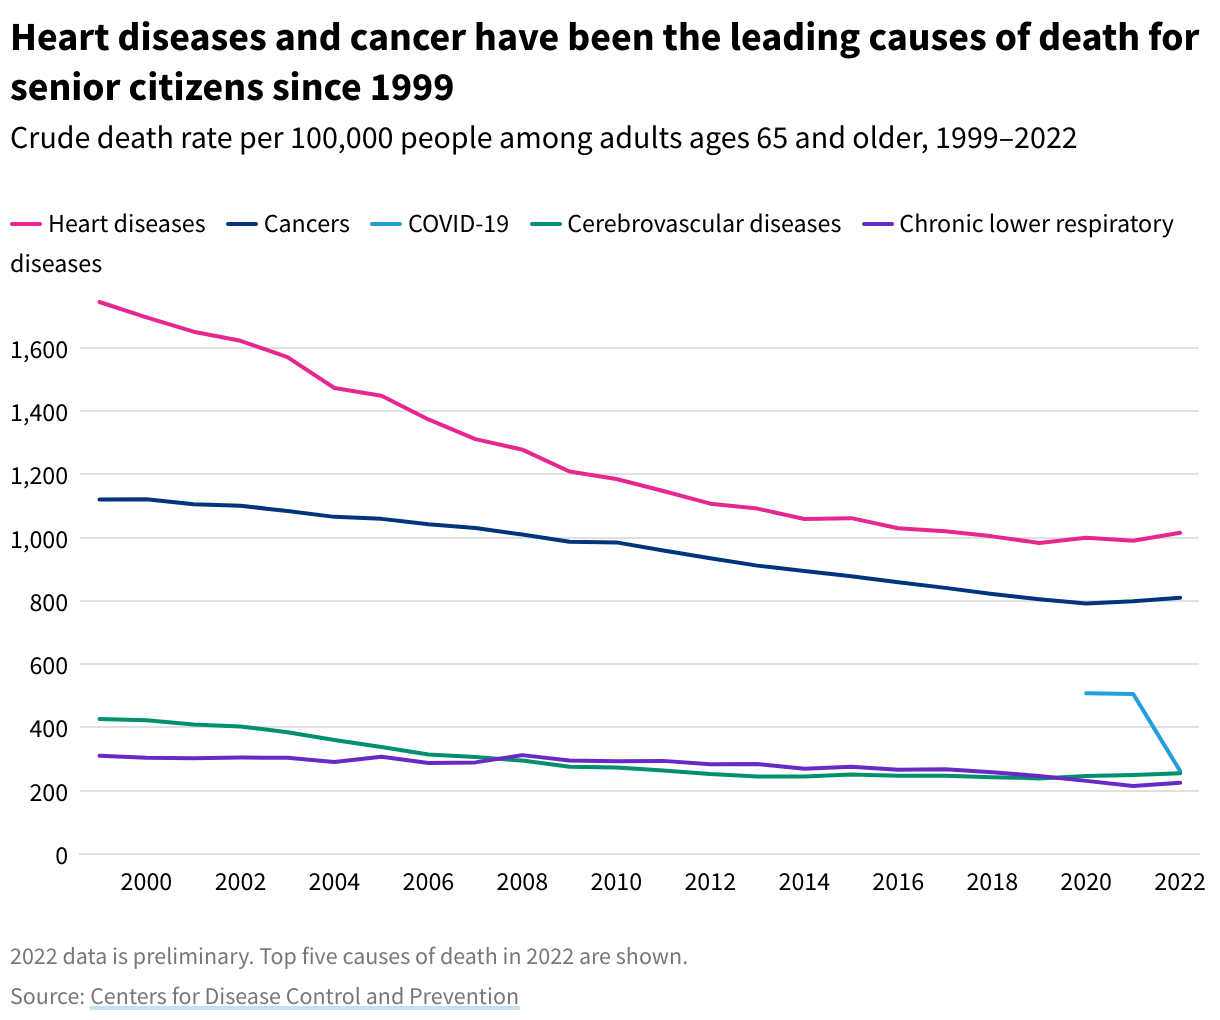 Line graph showing that heart disease, then cancer has consistnetly been the leading cause of death for seniors since 1999, but COVID appears as the third-leading cause in 2020. COVID deaths have steeply dropped off in 2022 but it is still third.